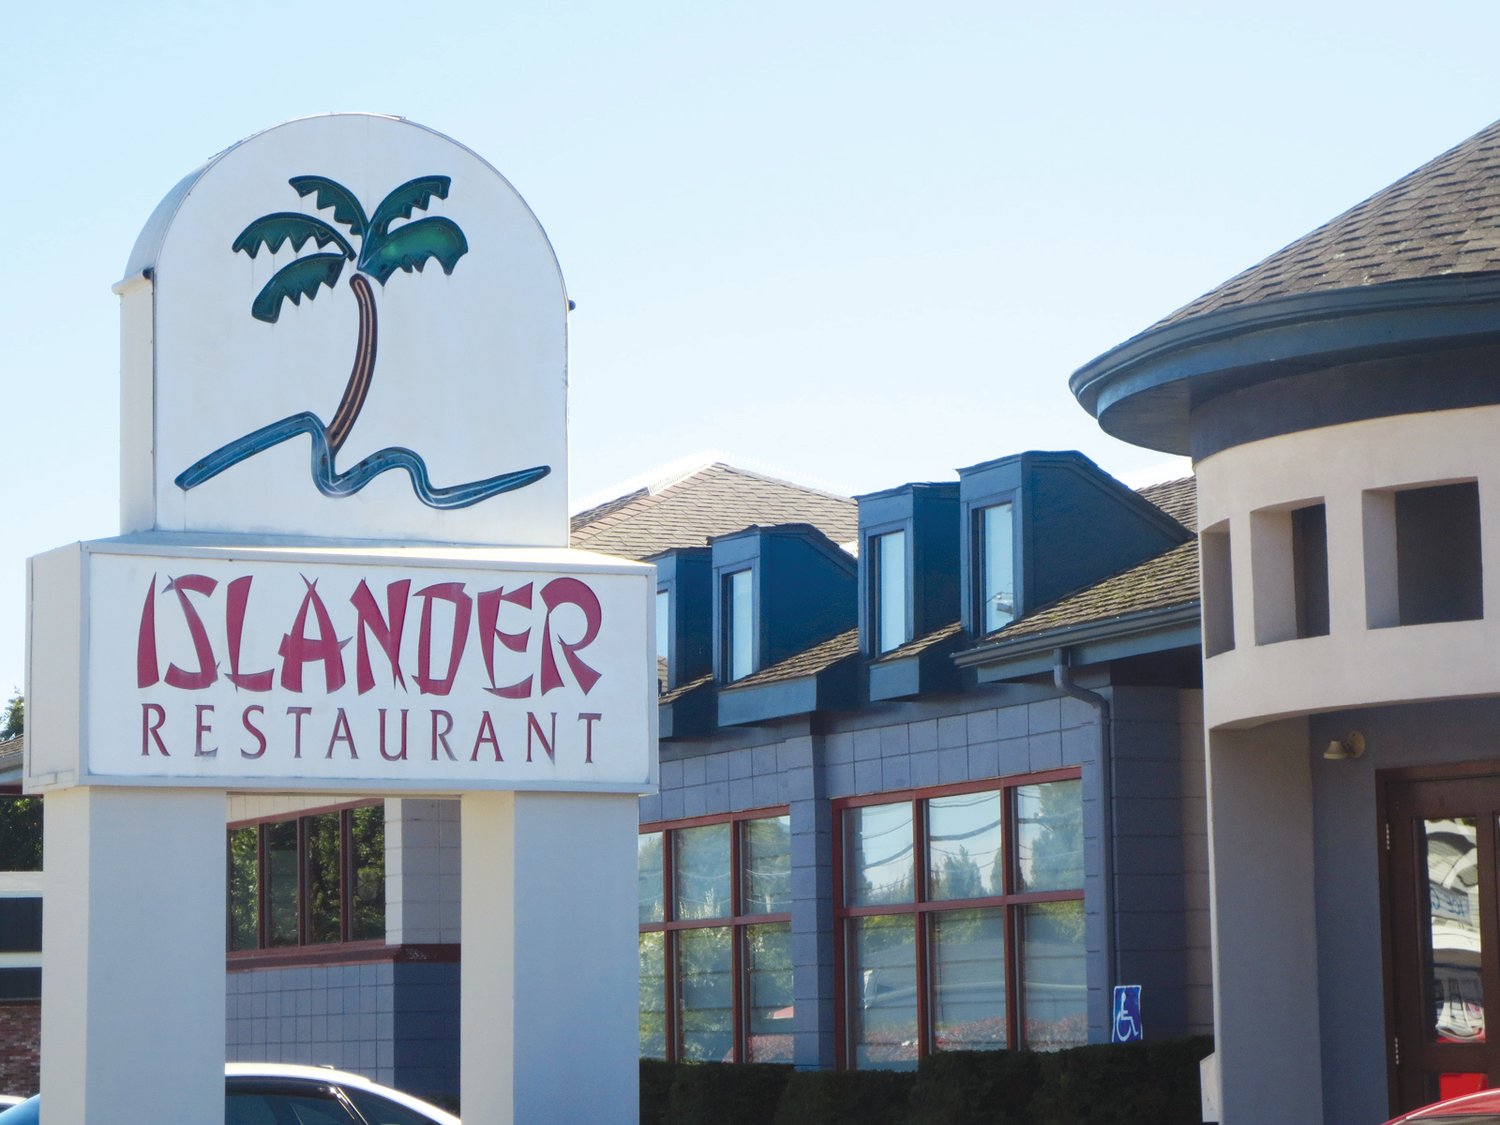 The Islander Restaurant has been a steady sight on the Warwick culinary landscape for decades.  The team of cooks, servers, and owners at this longstanding restaurant in the city wish you and your loved ones a happy, safe, and prosperous 2022!